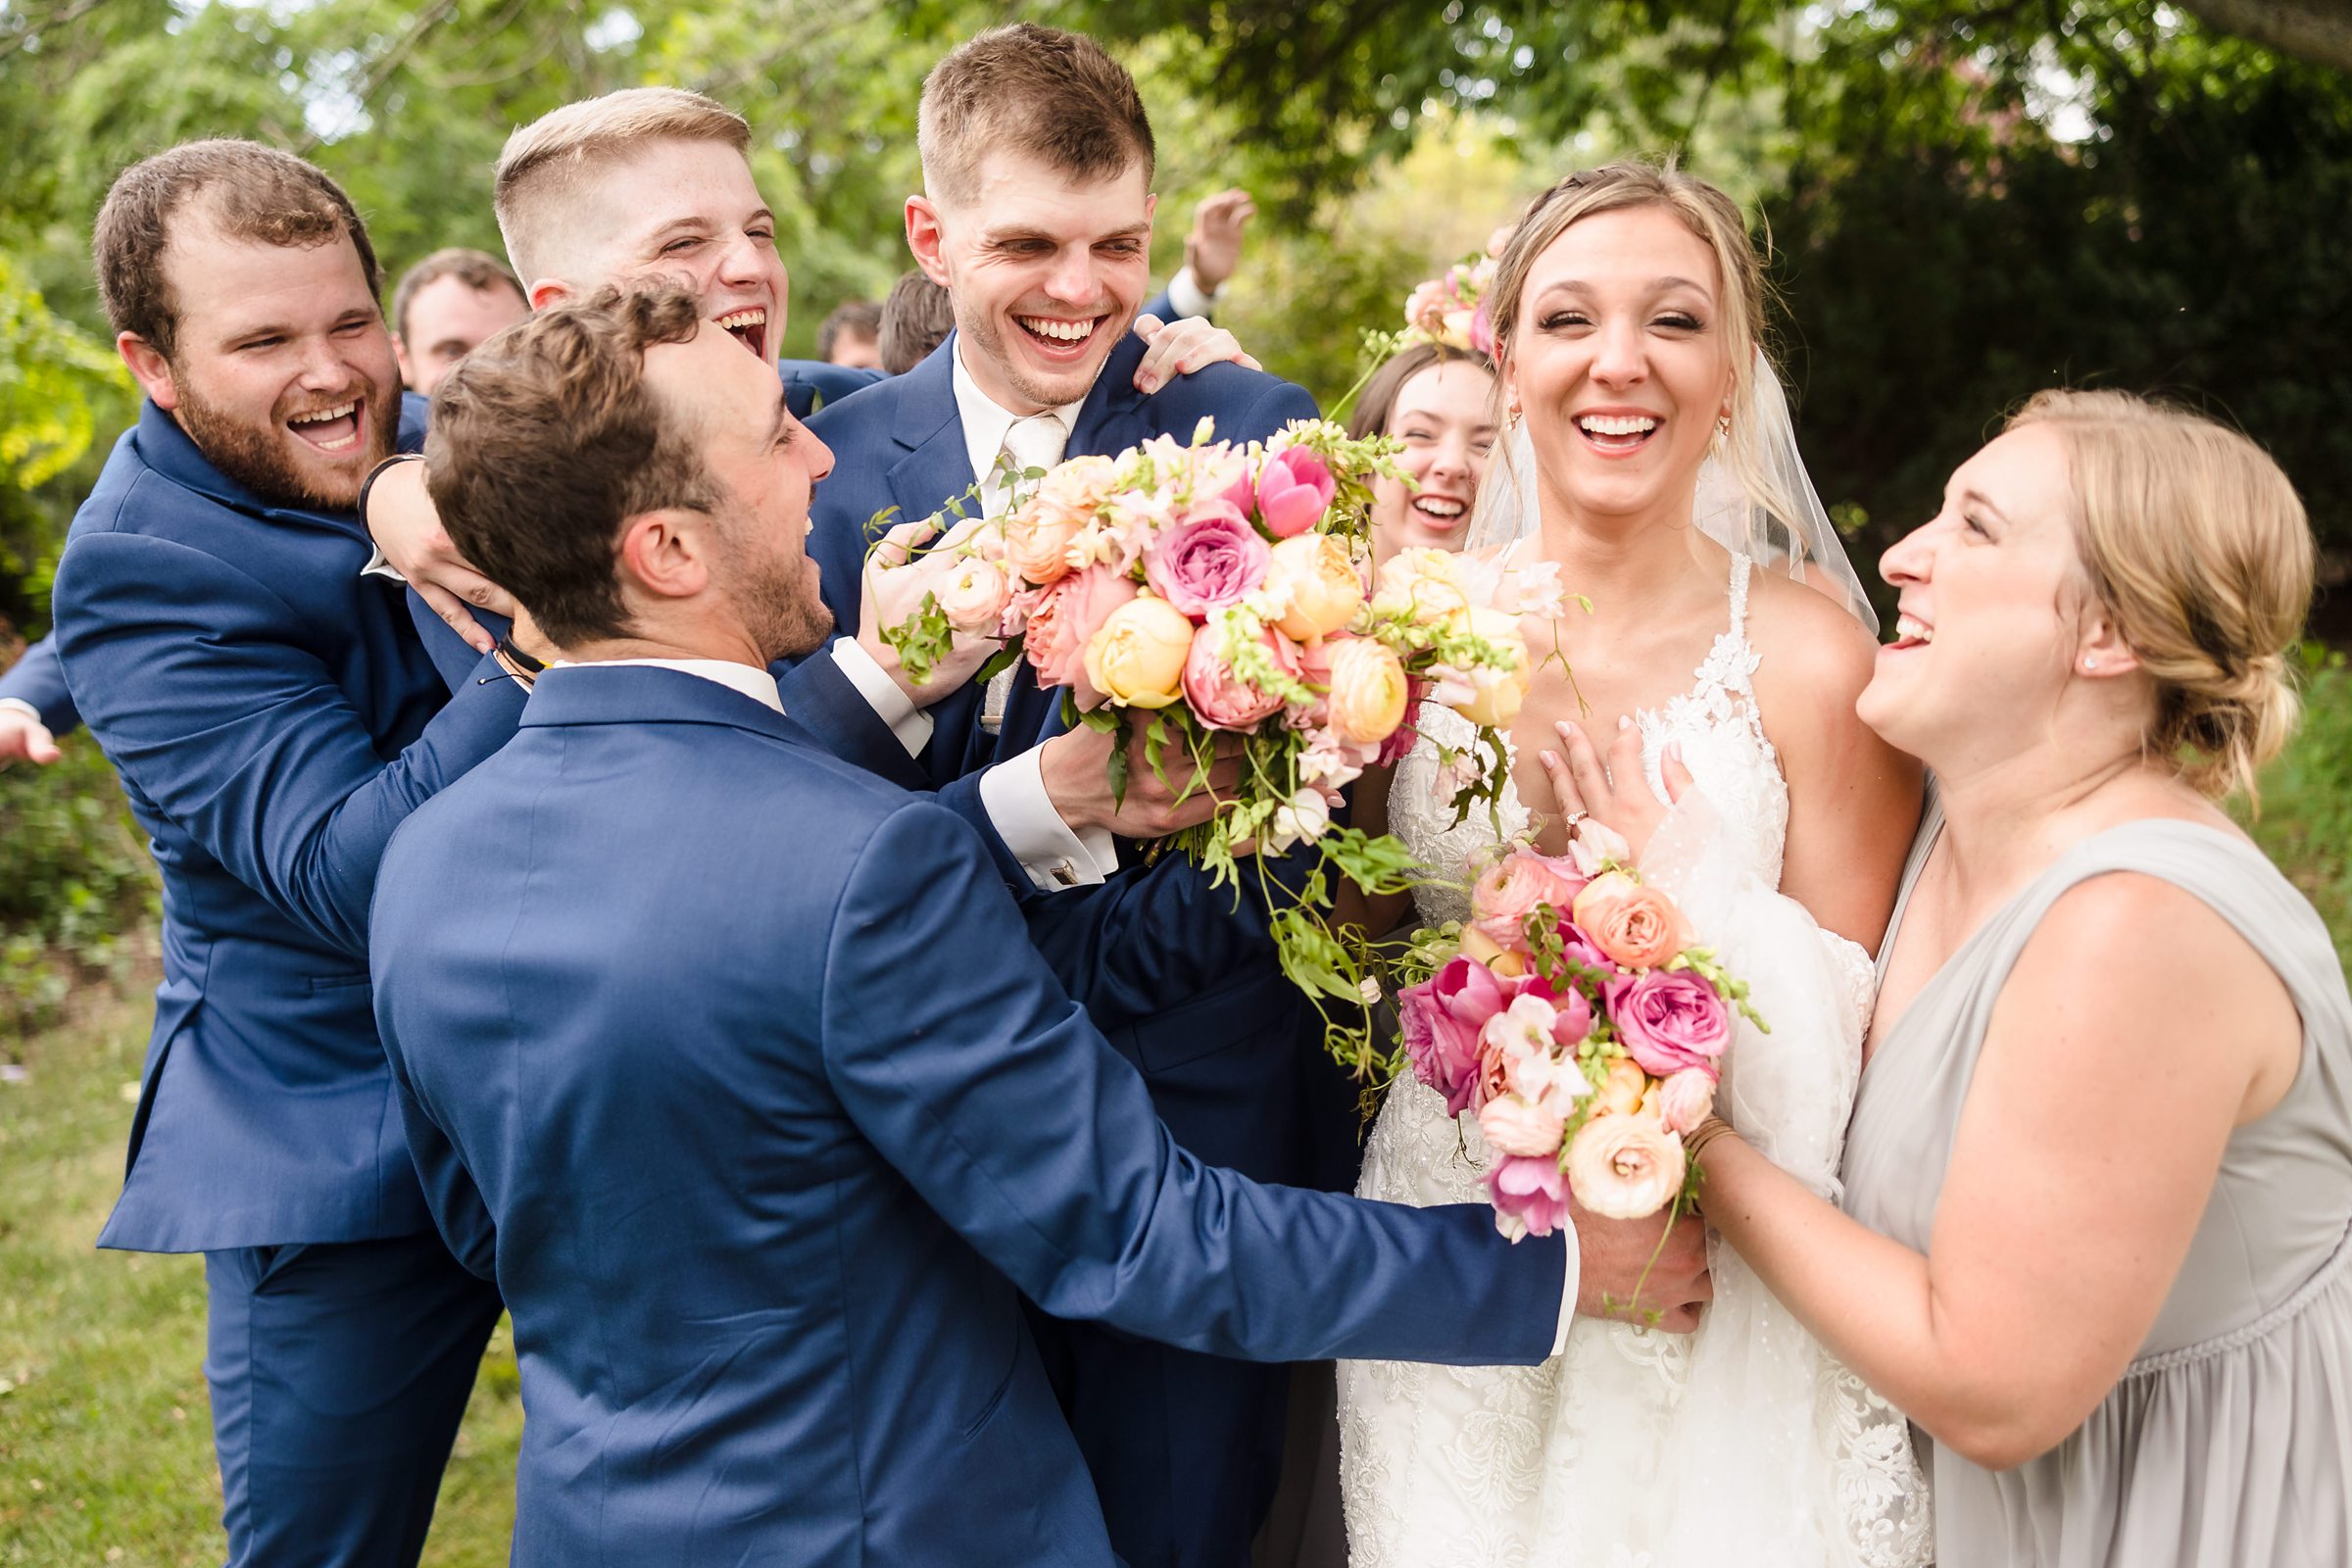 Bridal party celebrates a wedding at the Luthy Botanical Garden in Peoria, Illinois